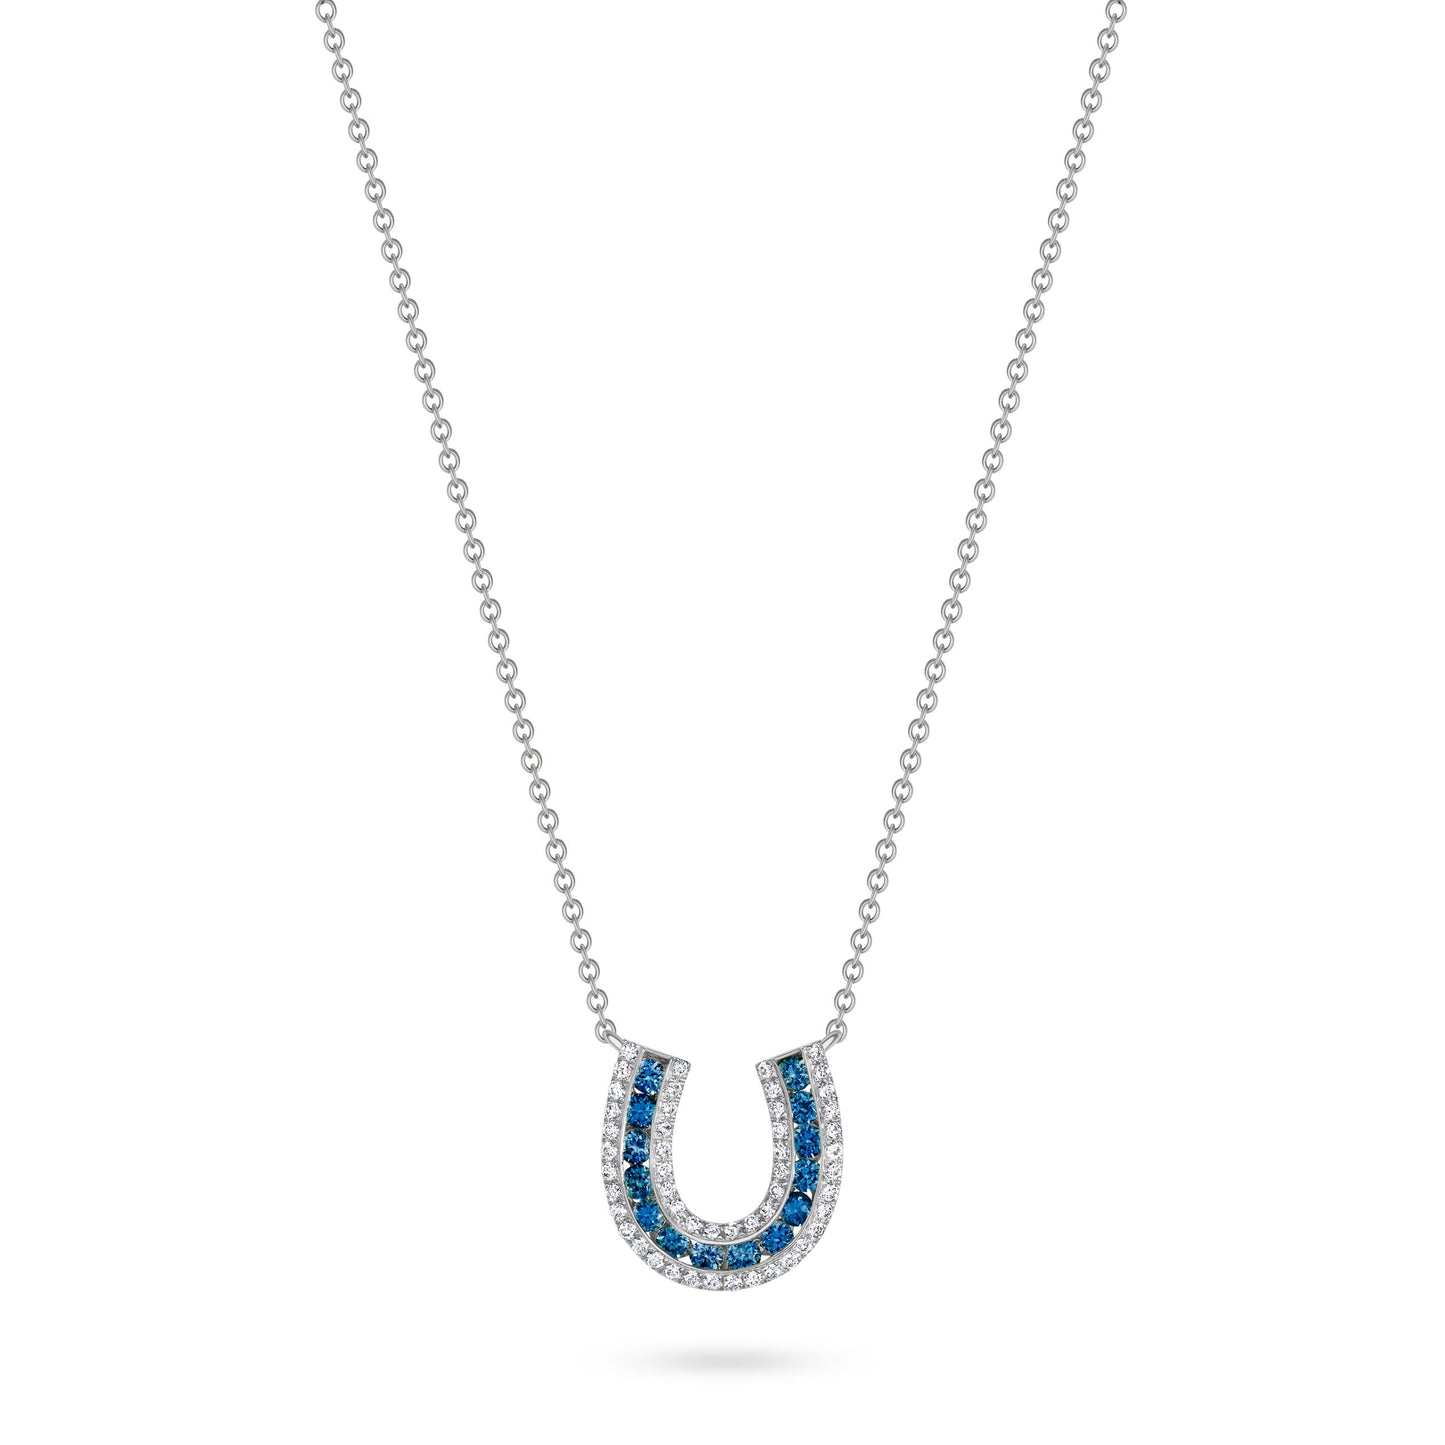 Lucky Horseshoe Necklace with Blue Sapphires